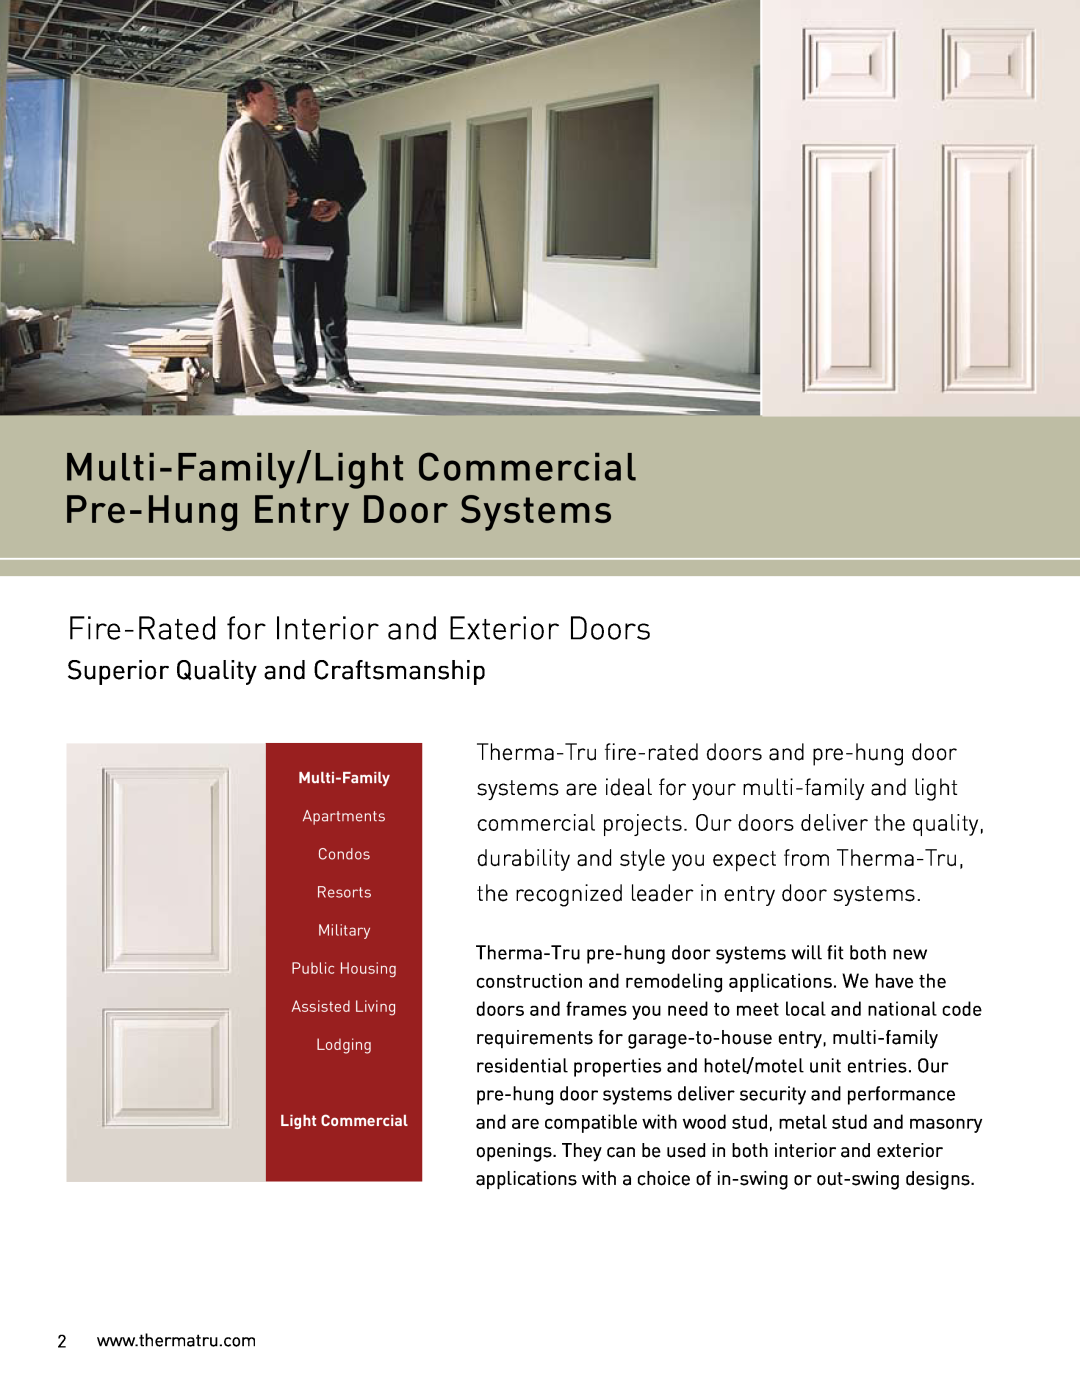 Therma-Tru Multi-Family Pre-Hung manual Fire-Ratedfor Interior and Exterior Doors, Superior Quality and Craftsmanship 